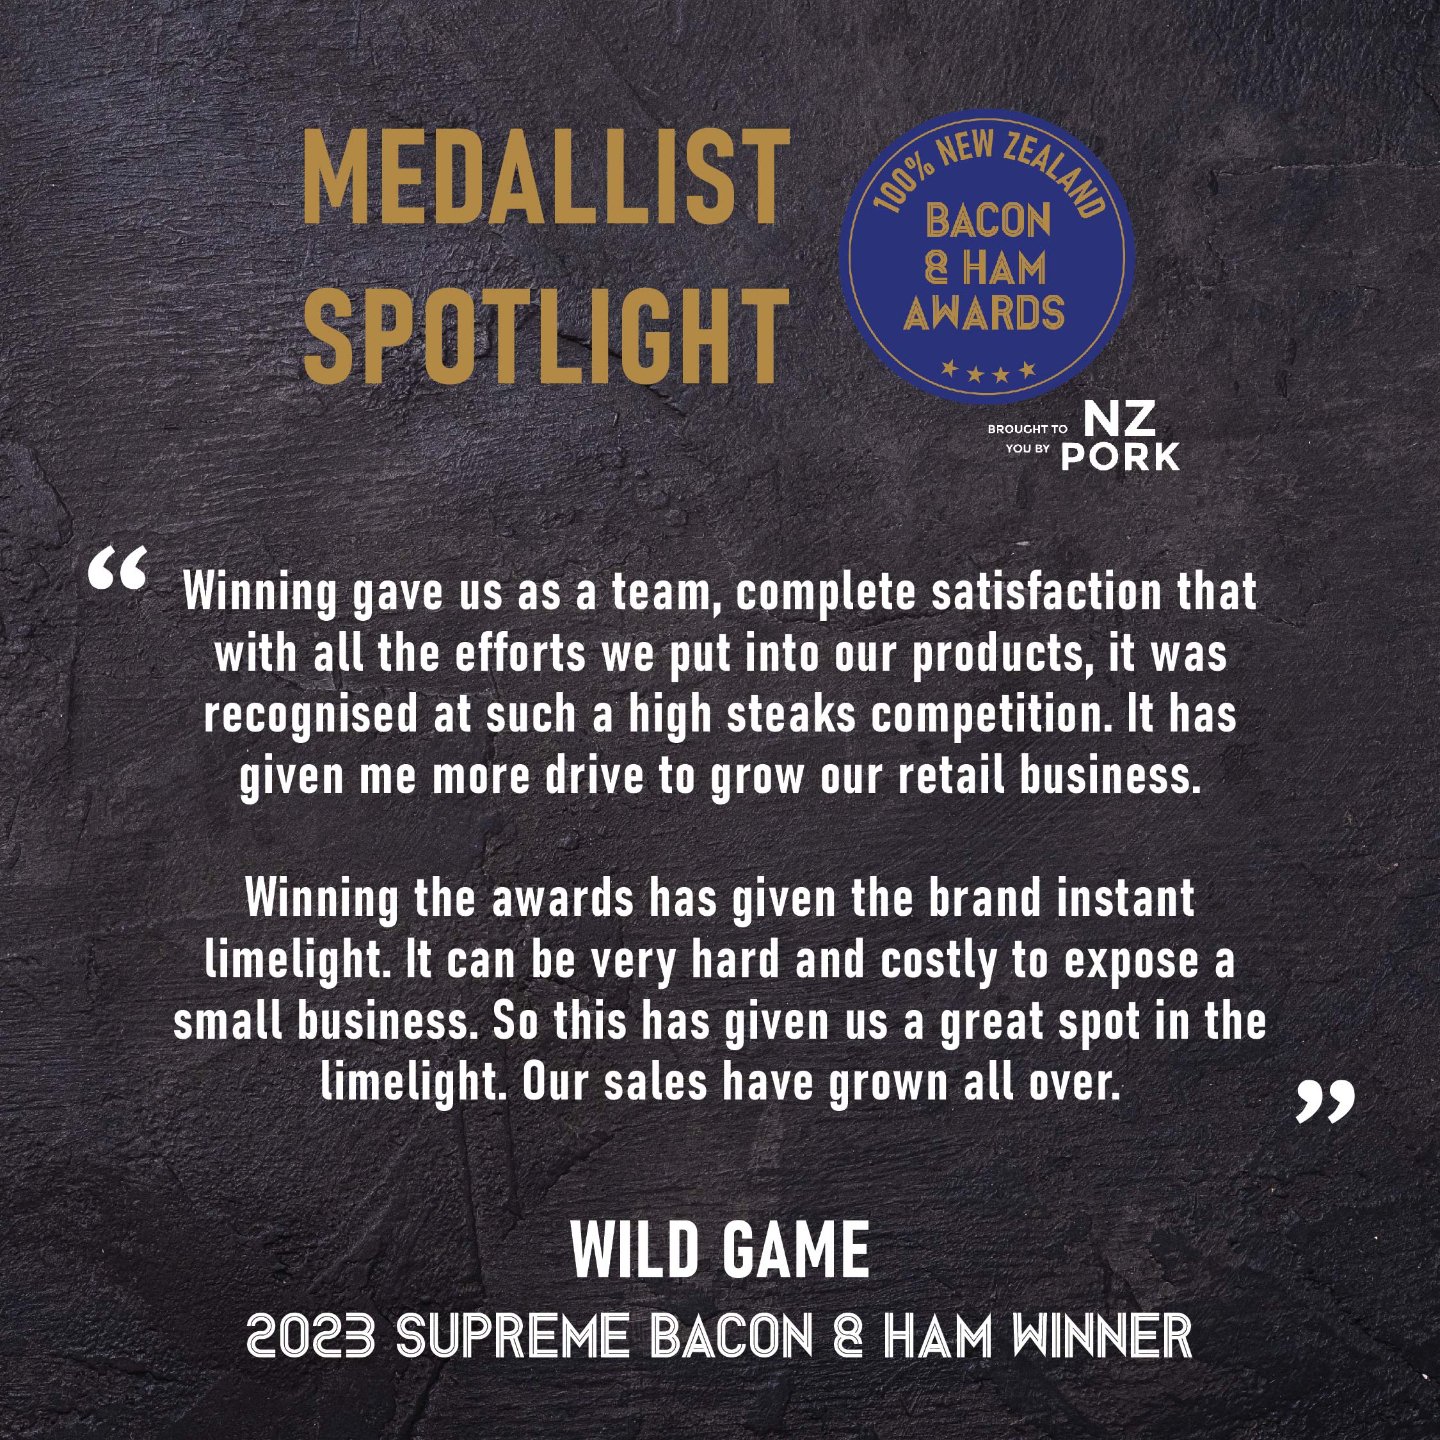 2023 was a tremendous year for the team at Wild Game. Using good quality New Zealand Pork has been instrumental in creating the winning product.

The overnight success of being the double supreme winner was a lot to handle, but Jordan and his team ha